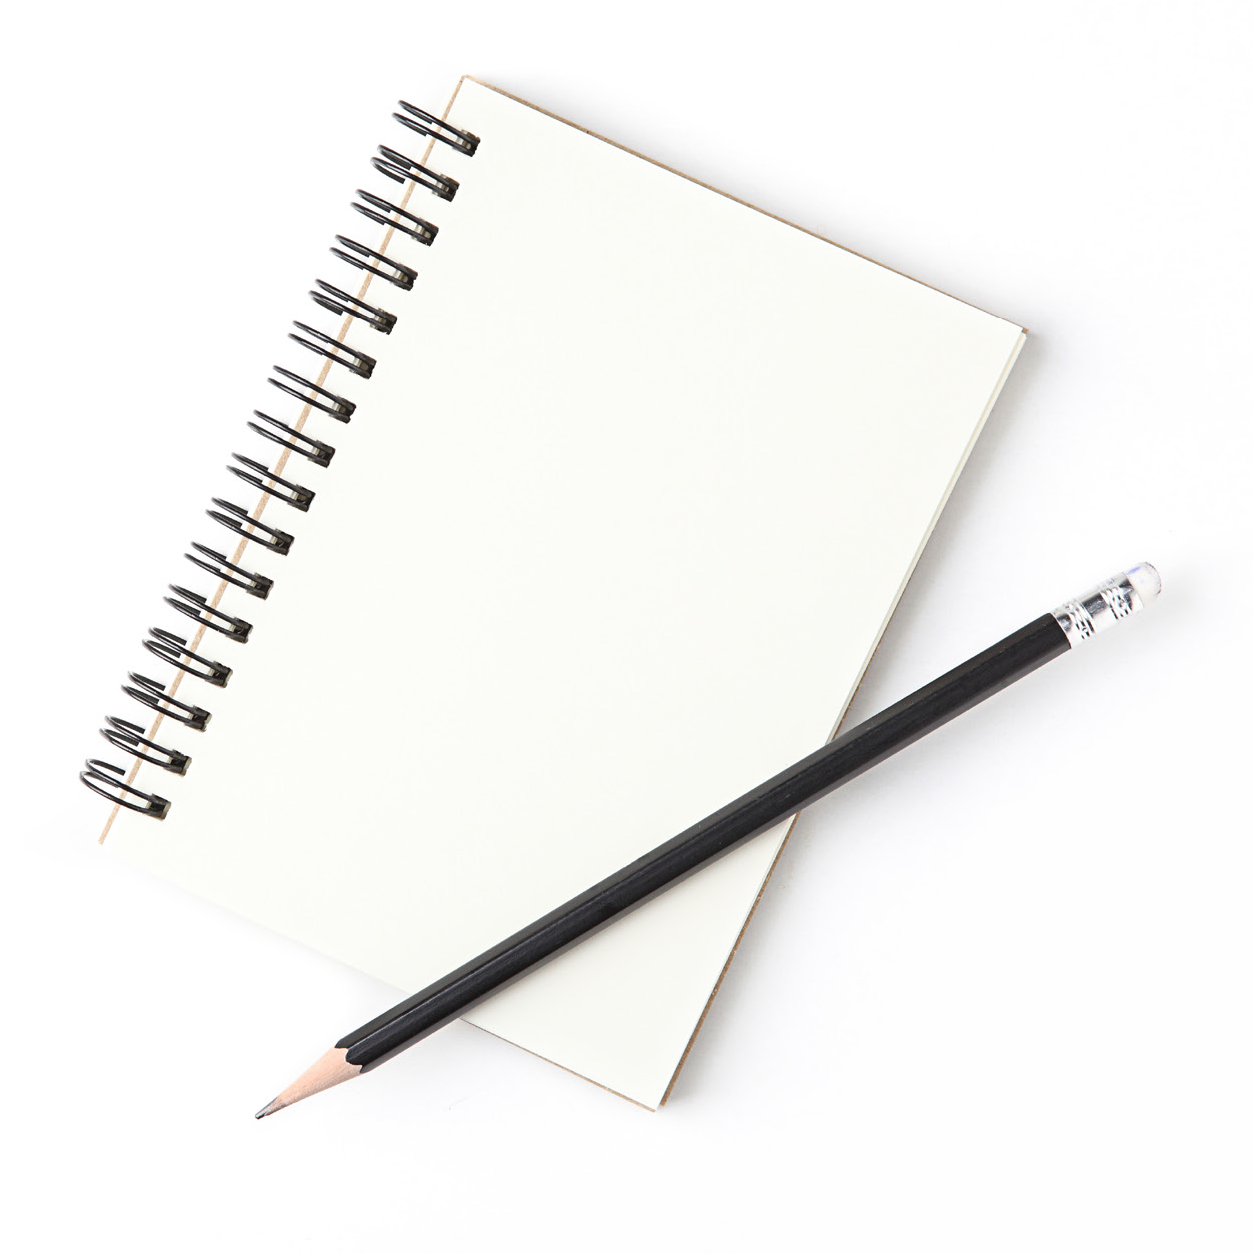 A notebook and pencil